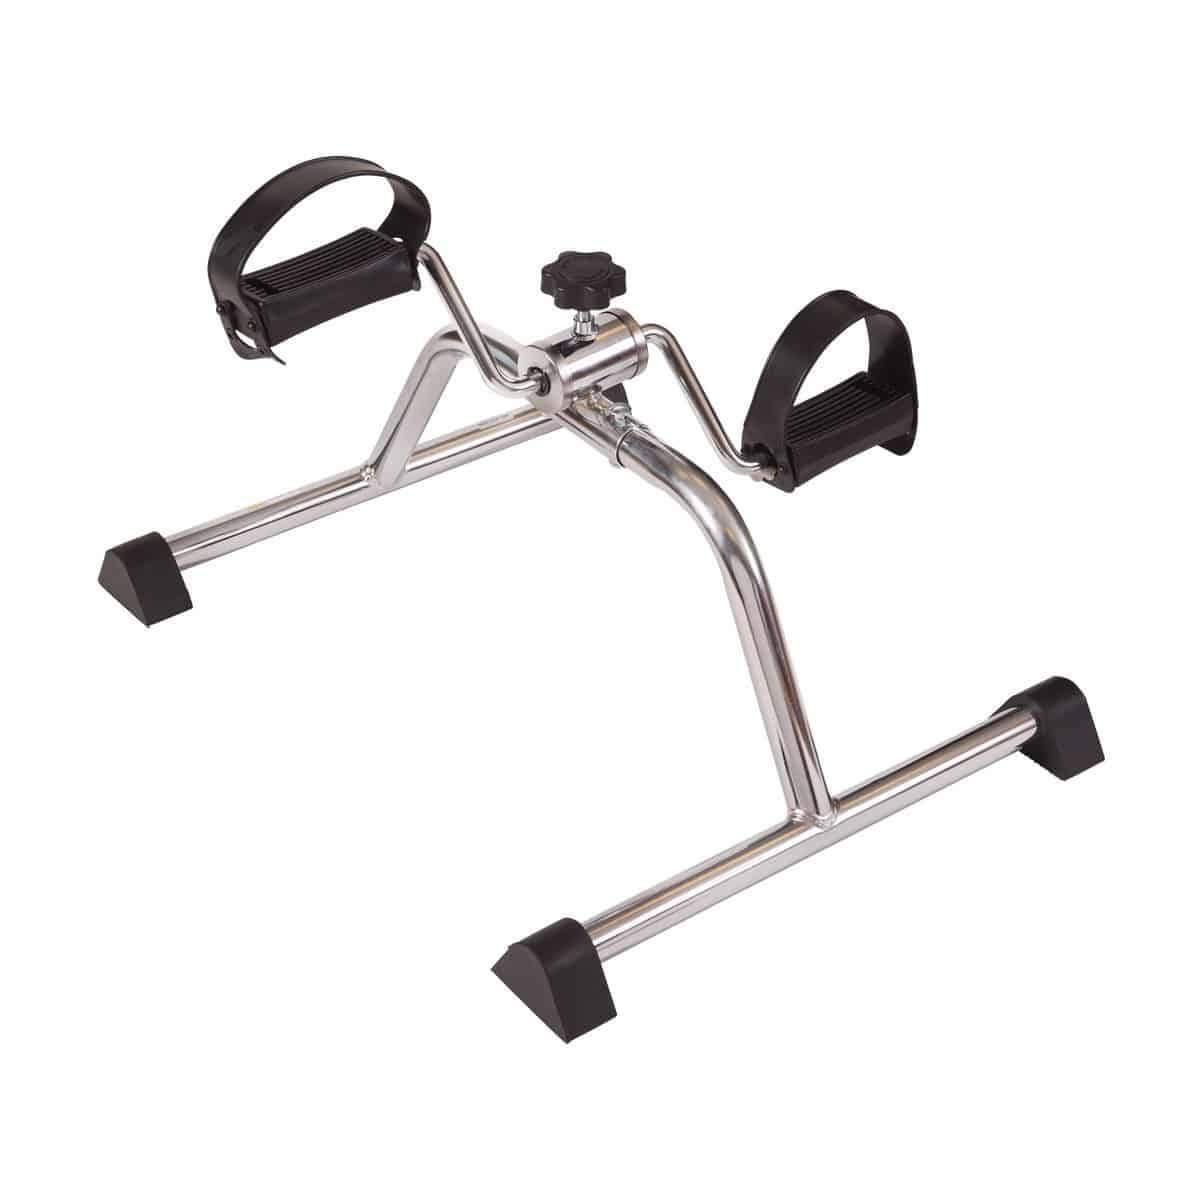 Duro-Med Portable  Pedal Exerciser - Stimulates Circulation and Muscle Strength - Senior.com Pedal Exercisers